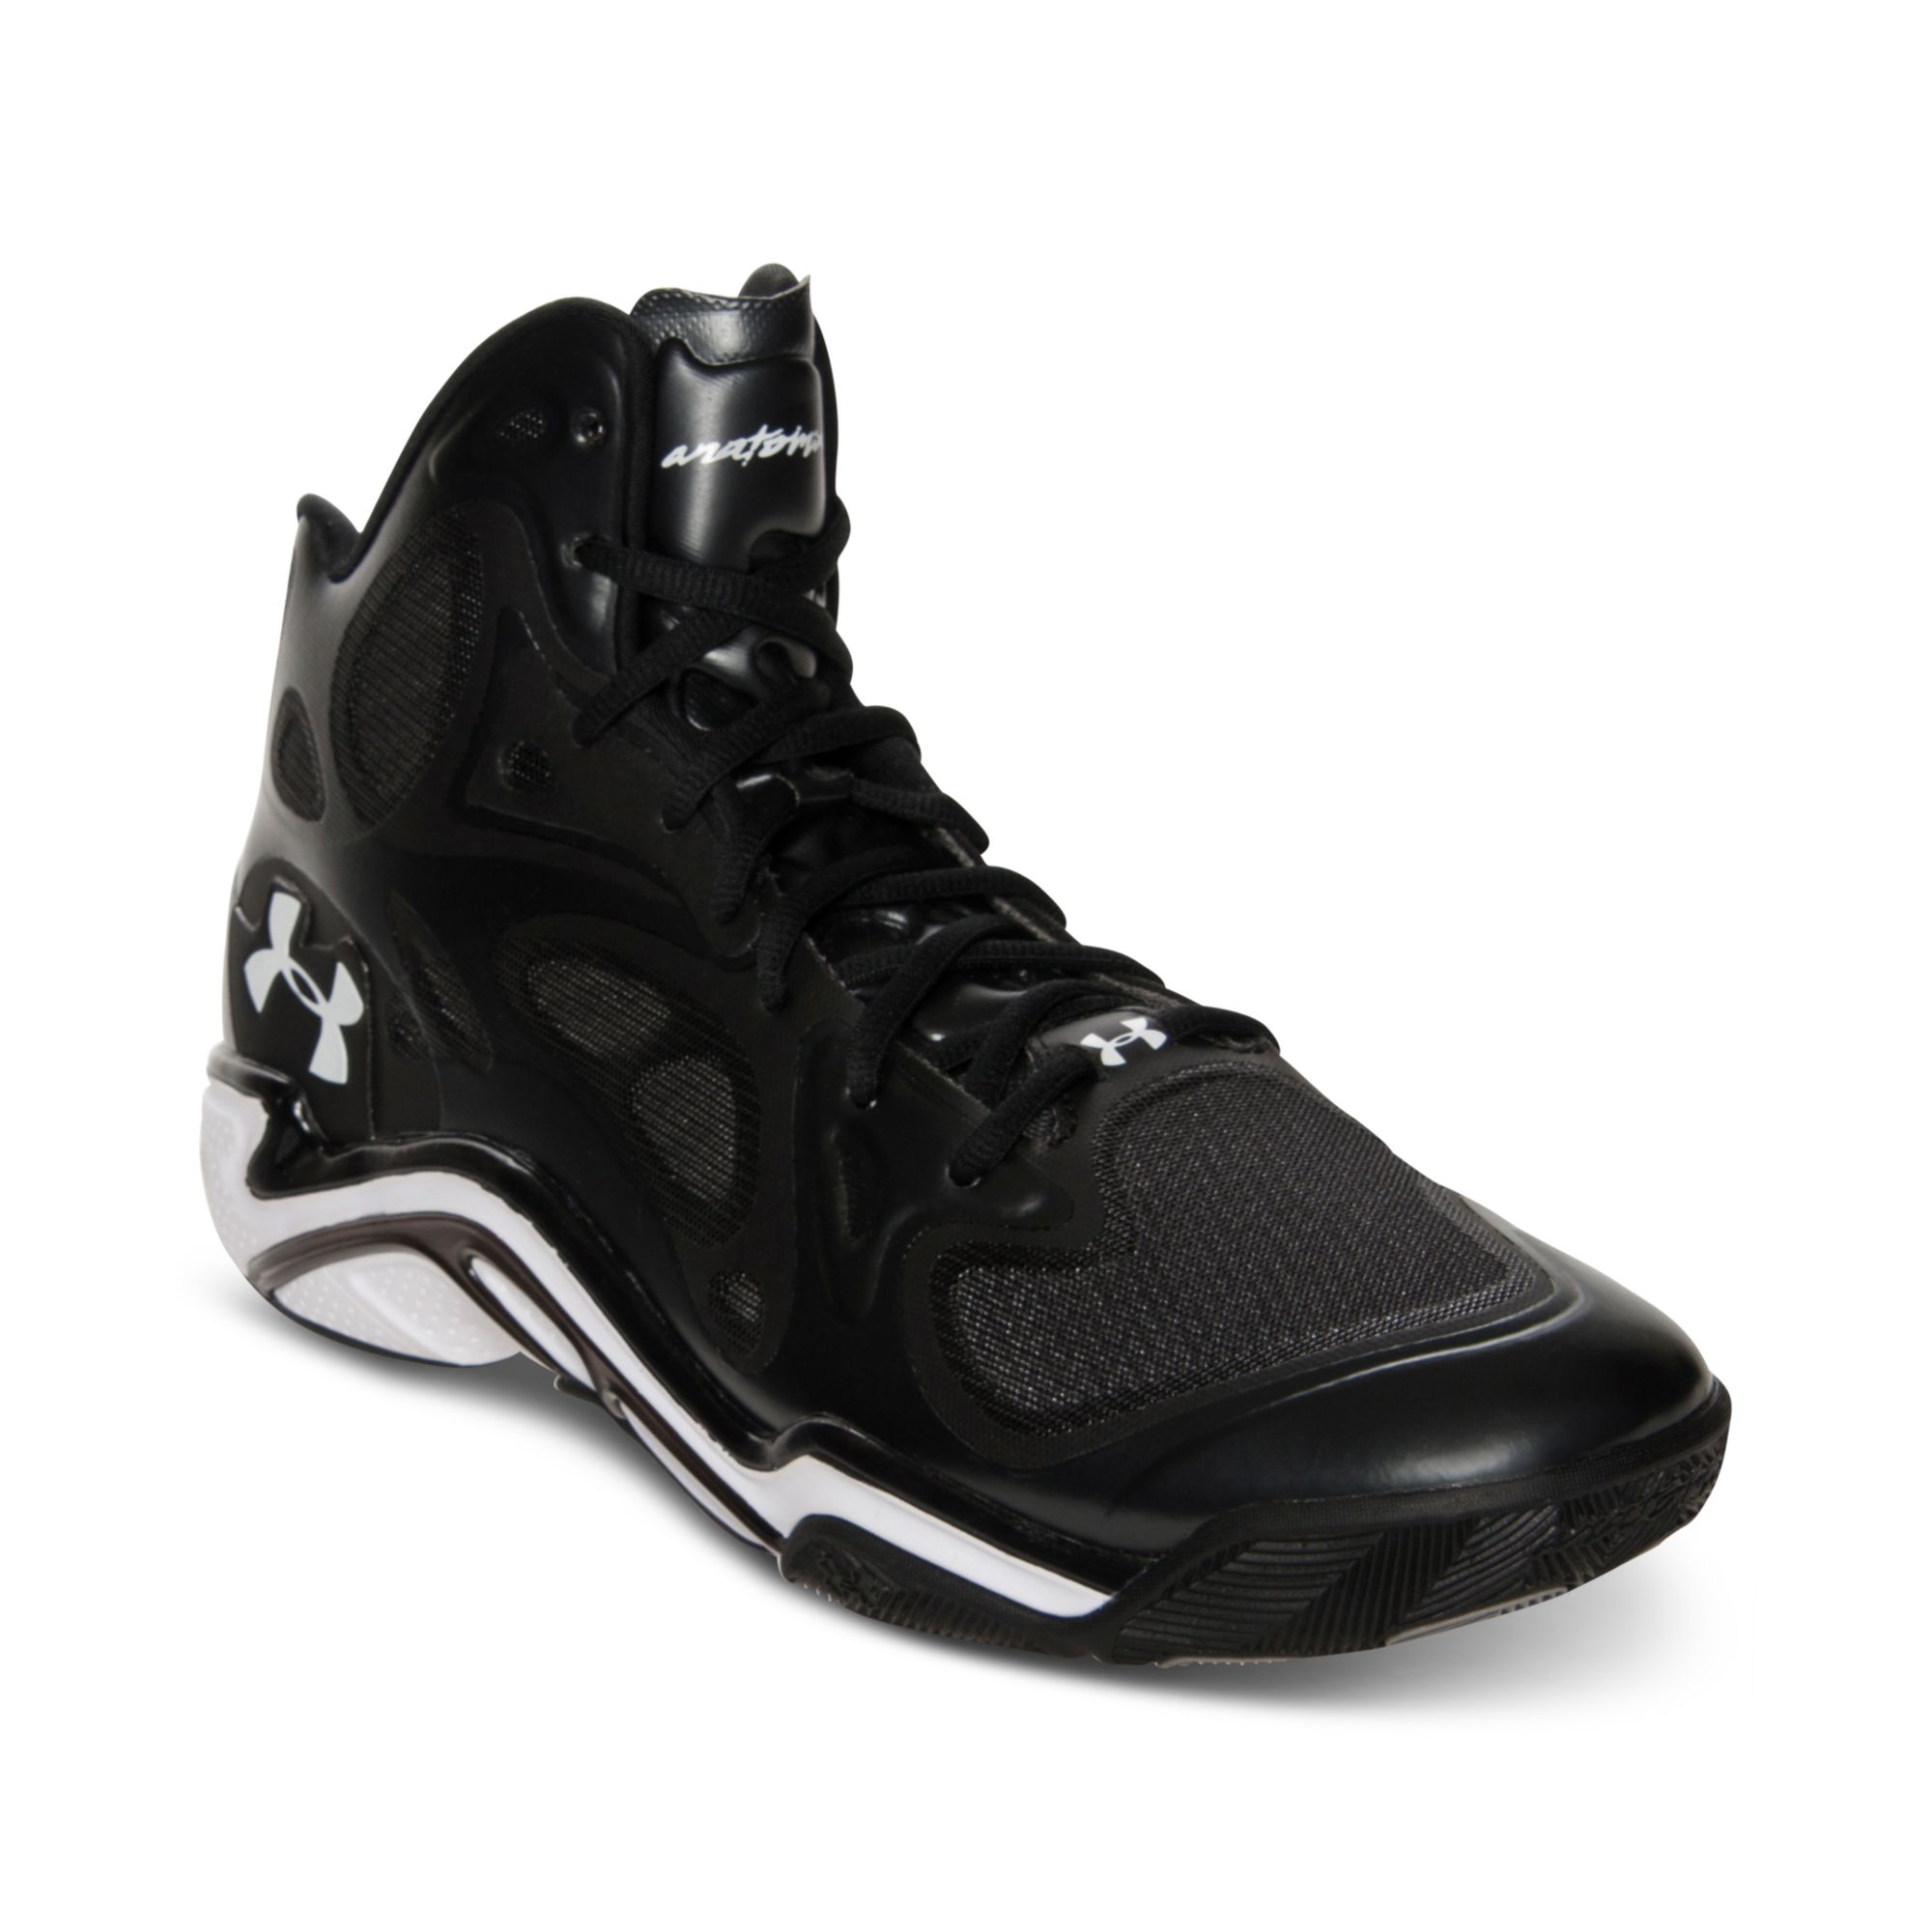 Under Armour Mens Micro G Anatomix Spawn Basketball Sneakers From ...